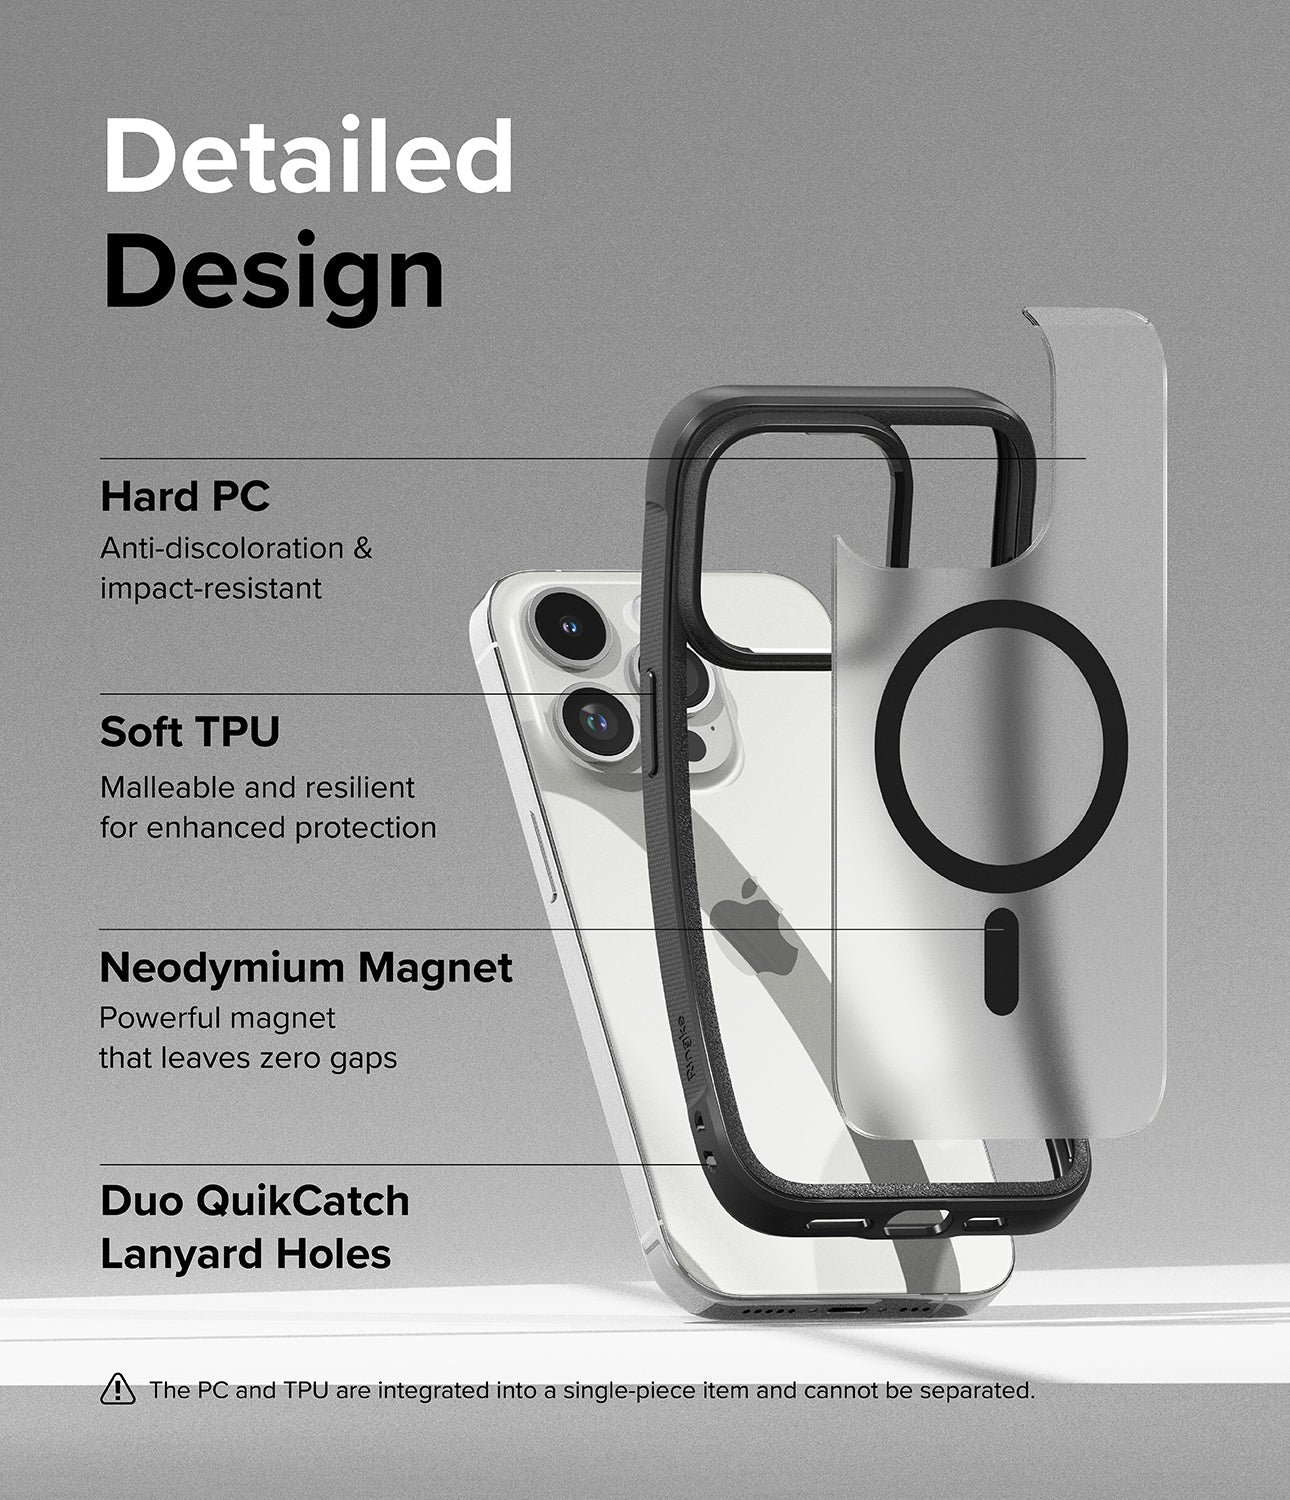 iPhone 15 Pro Max Case | Fusion Bold Magnetic - Detailed Design. Anti-discoloration and impact-resistant with Hard PC. Malleable and resilient for enhanced protection with Soft TPU. Powerful Neodymium Magnet that leaves zero gaps. Duo QuikCatch Lanyard Holes.